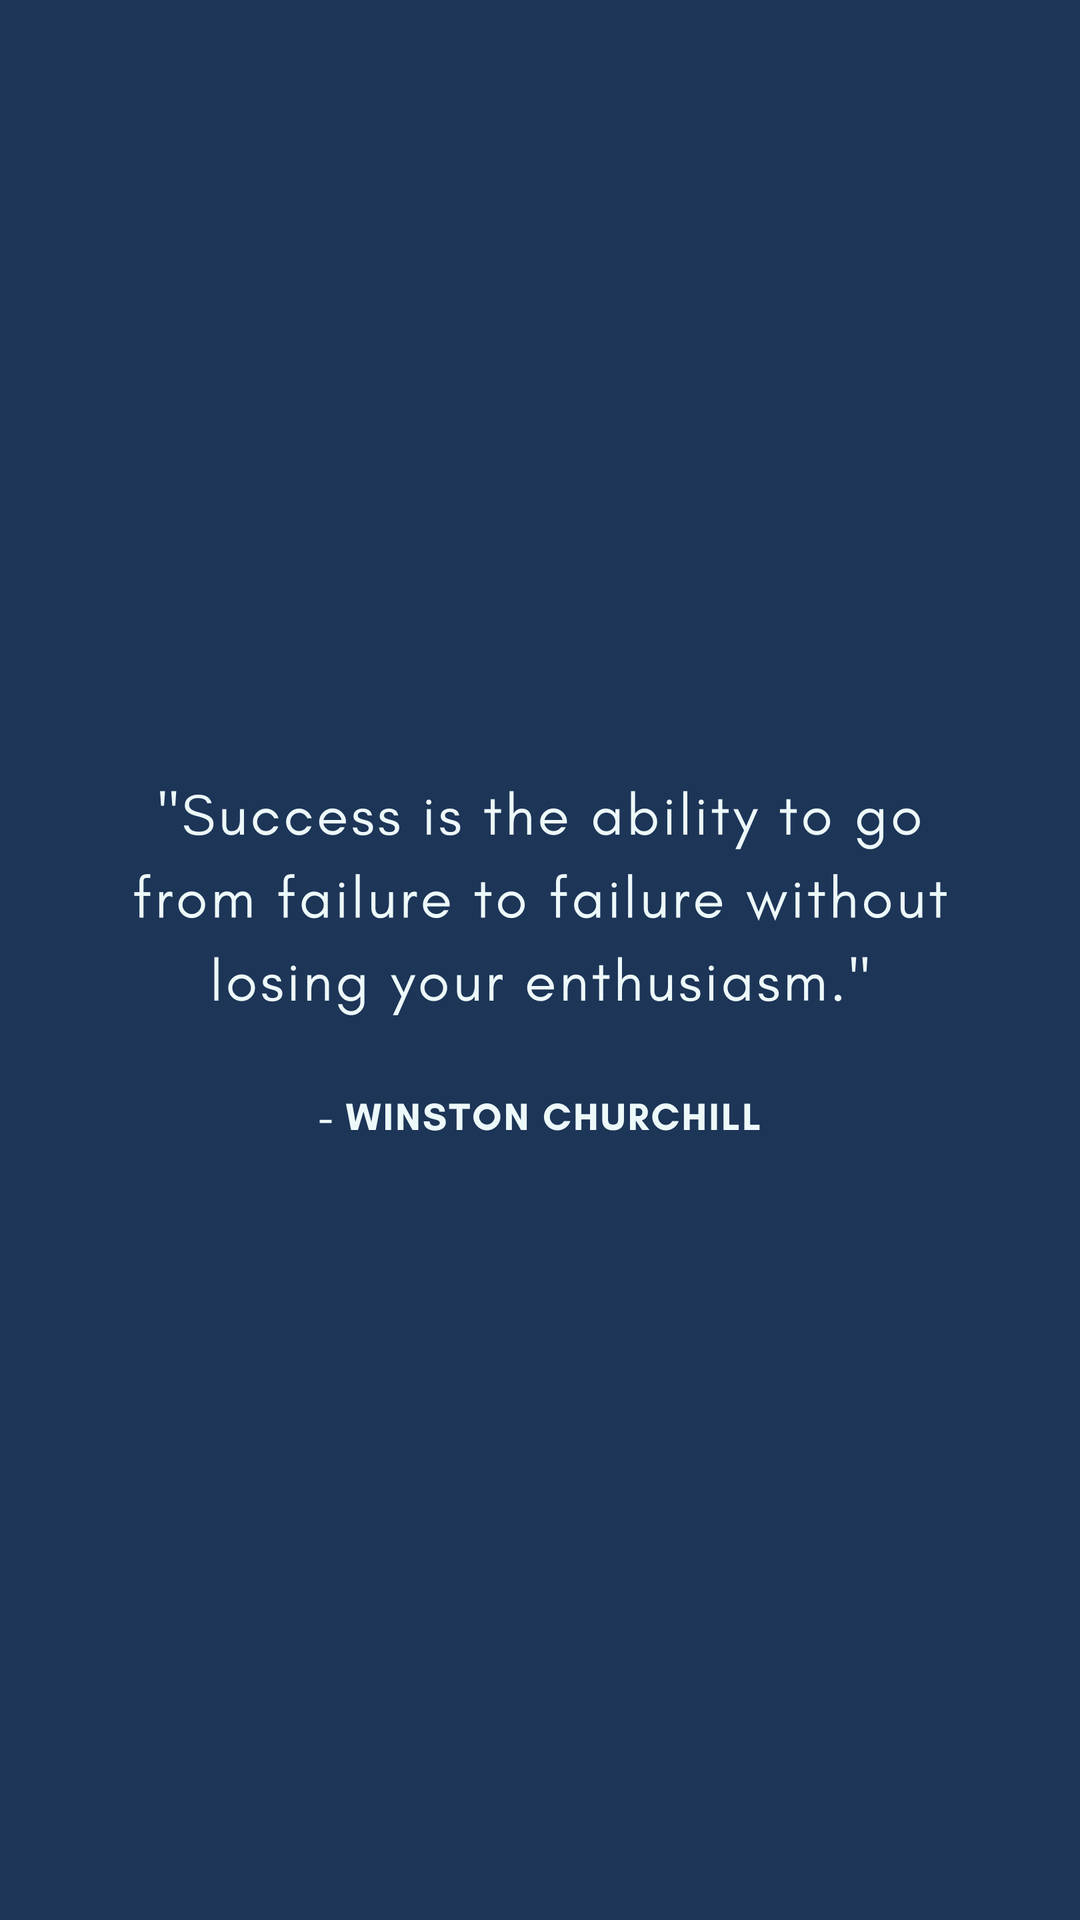 "Success is not final, failure is not fatal: It is courage to continue that counts." -Winston Churchill Wallpaper